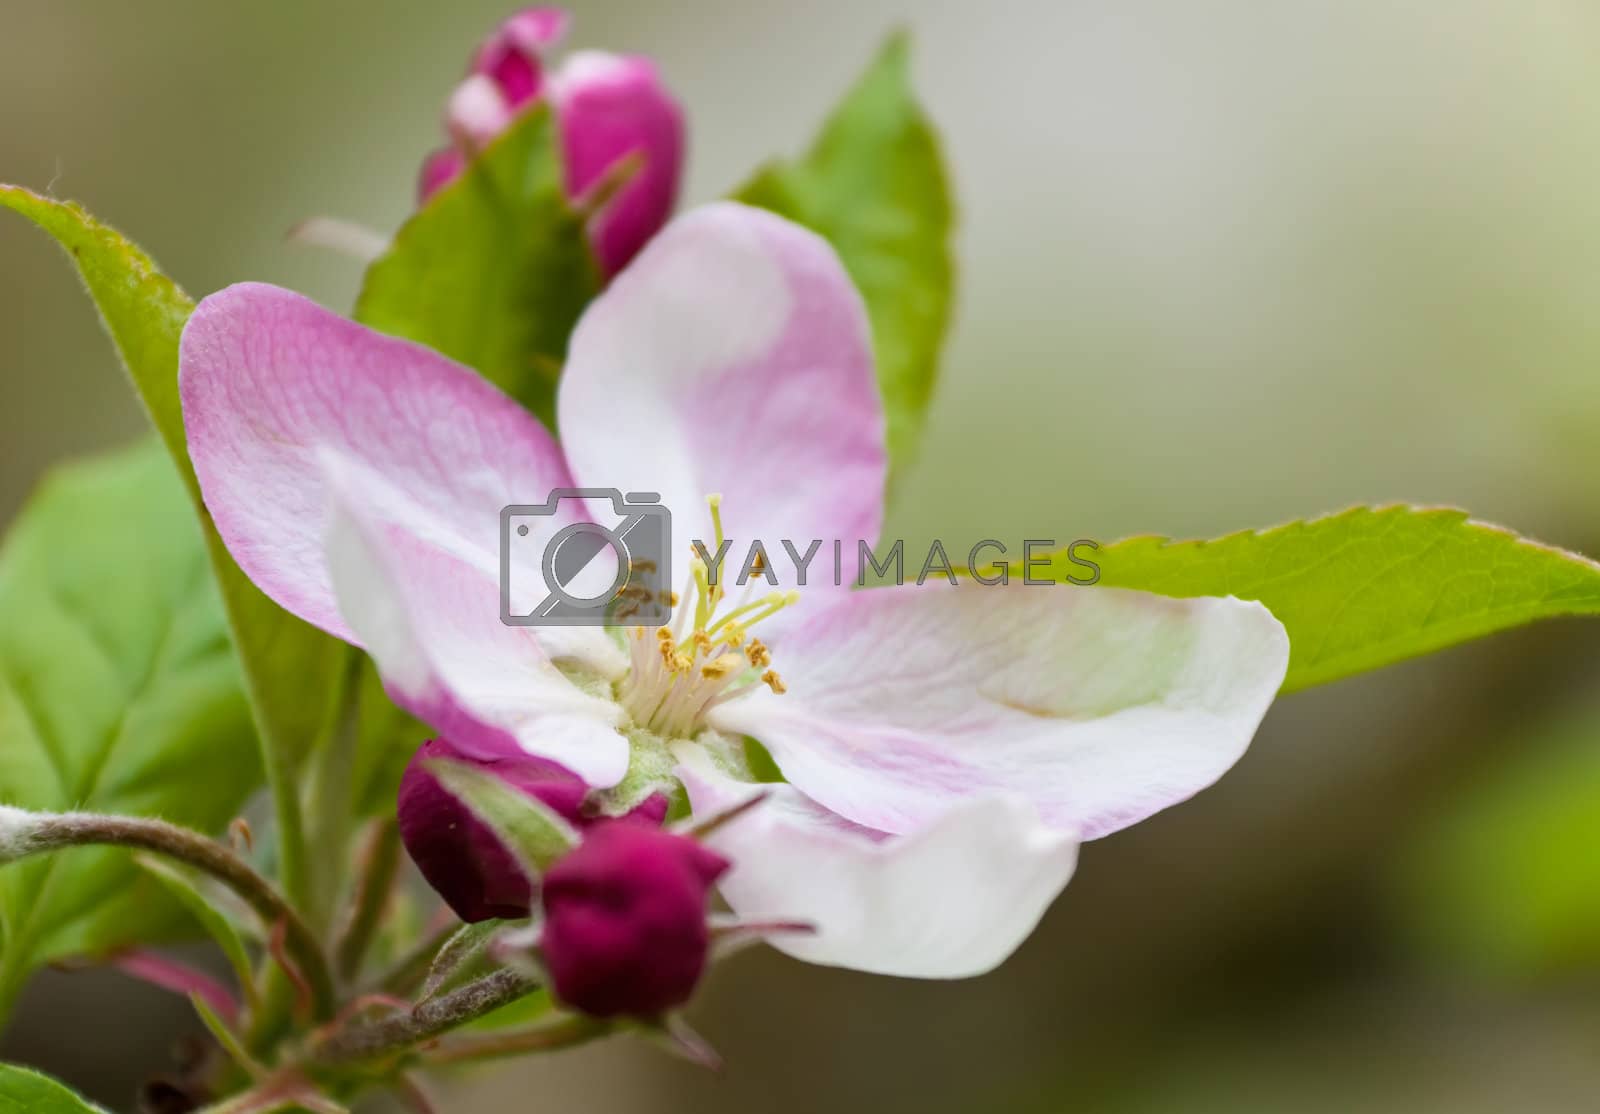 Royalty free image of Apple Blossom by Ragnar